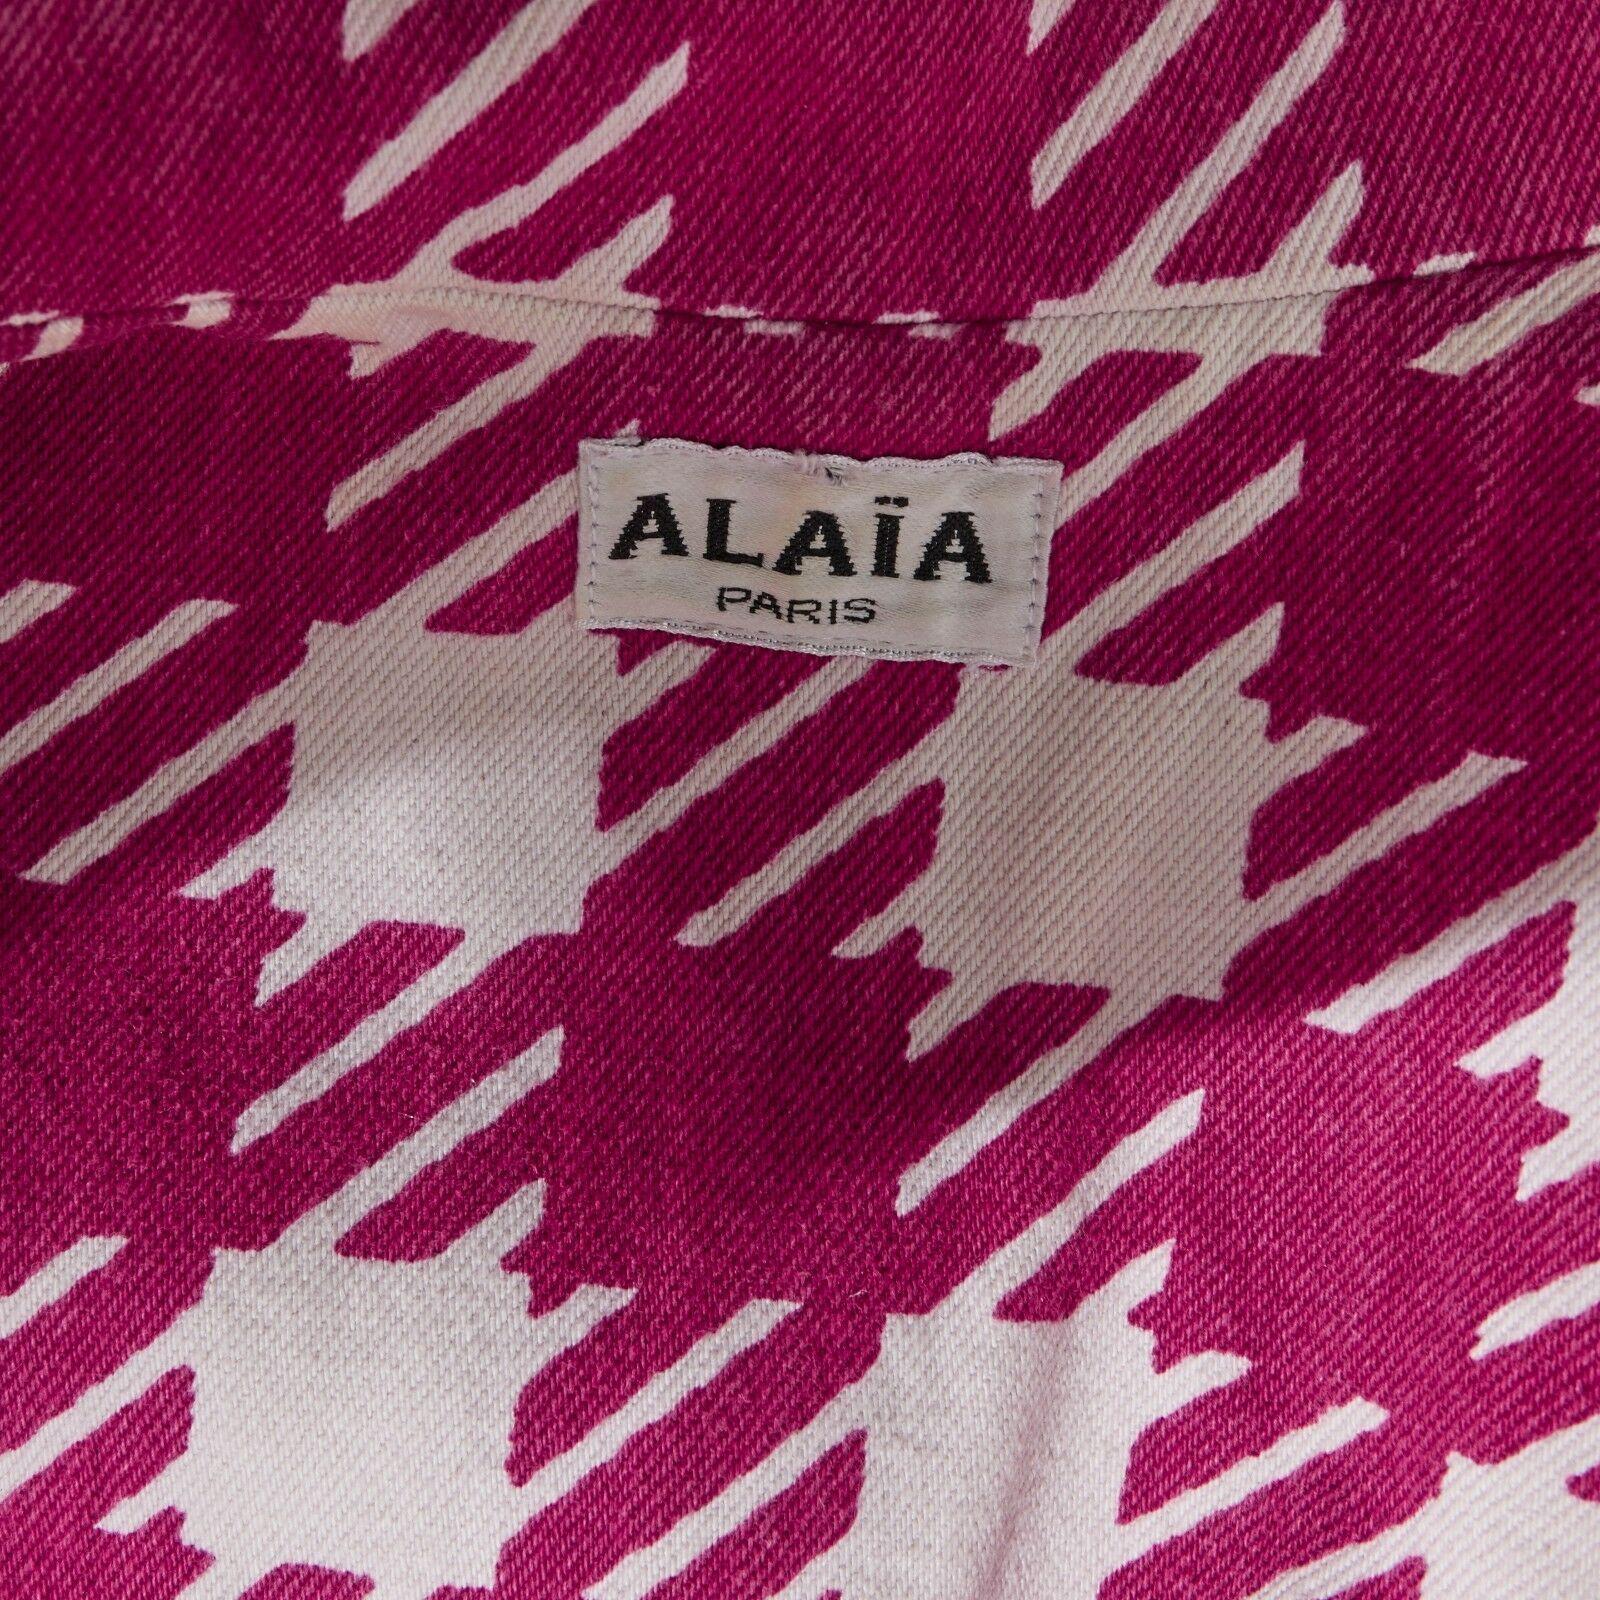 ALAIA Vintage SS91 Tati red white checked denim fitted jacket M FR38 IT42 US6 5